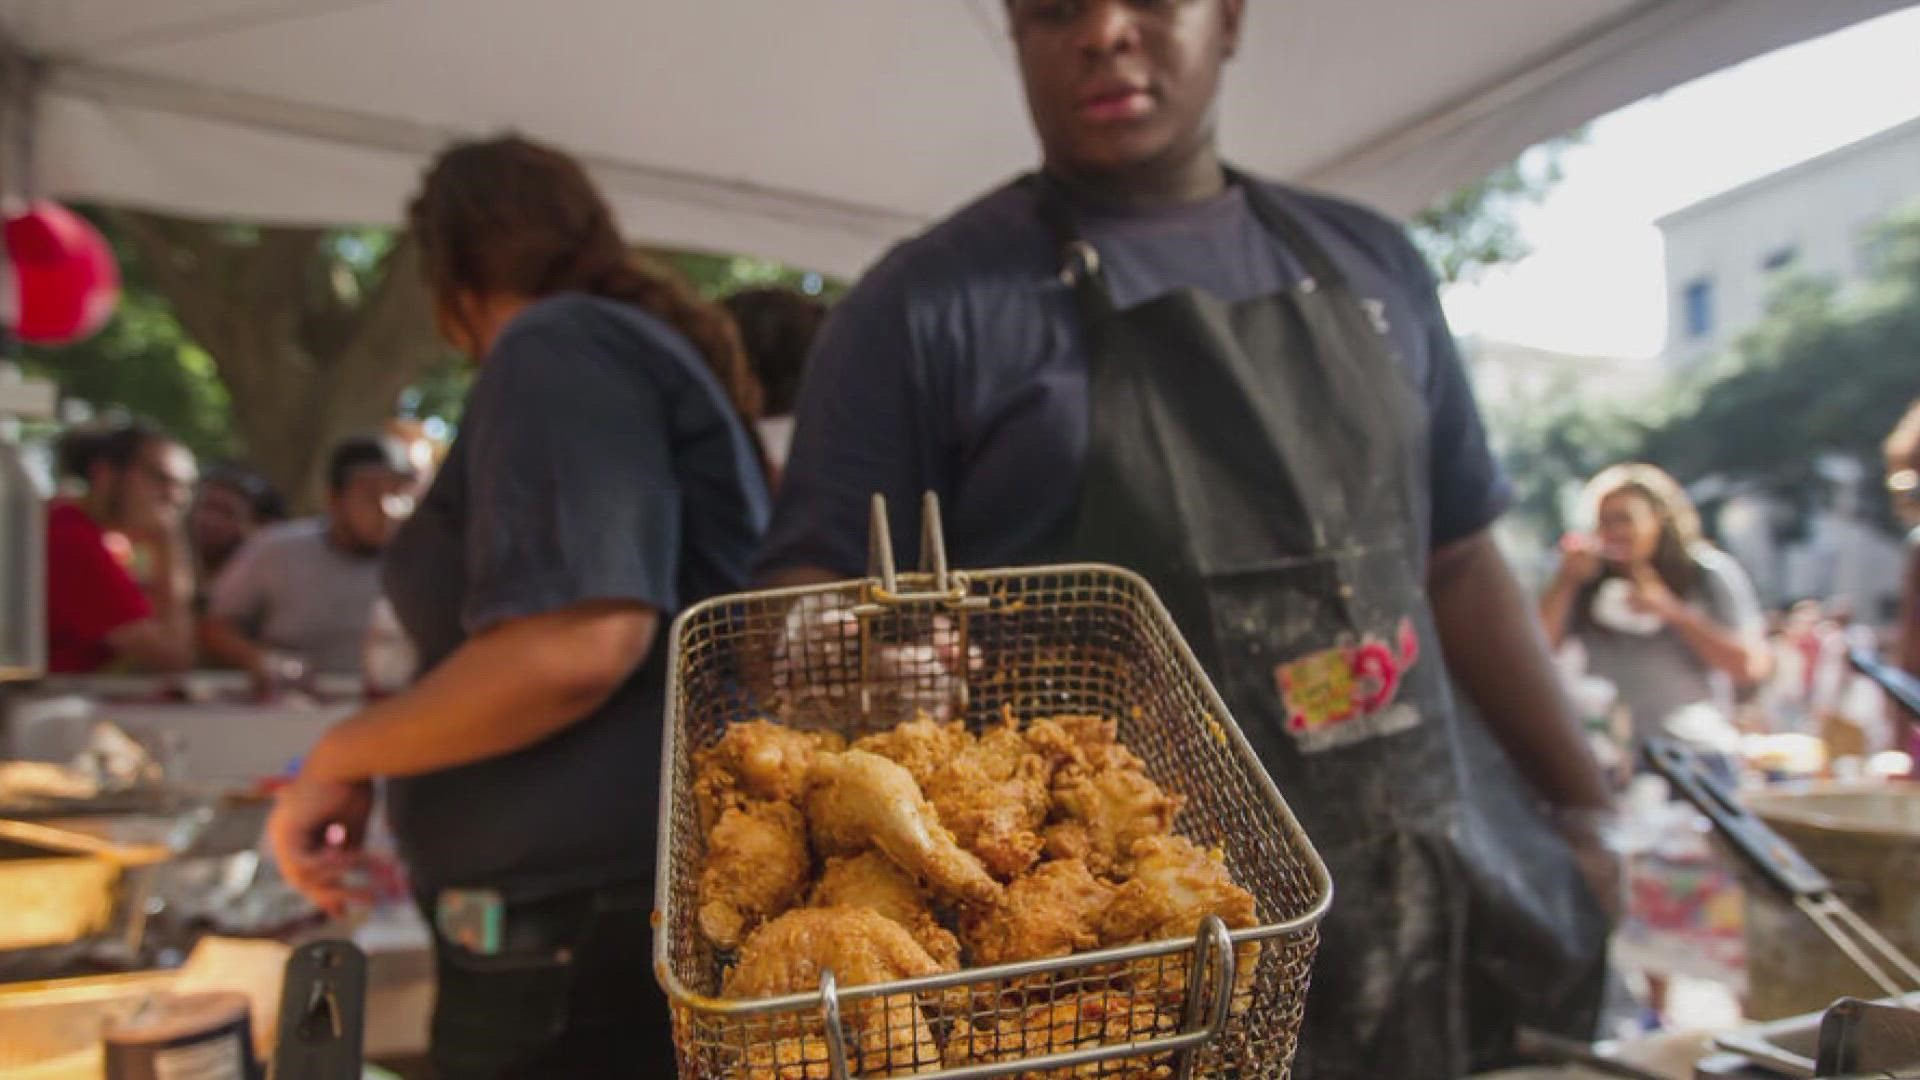 Ian McNulty of The Times Picayune / New Orleans Advocate previews Fried Chicken Fest 2022.